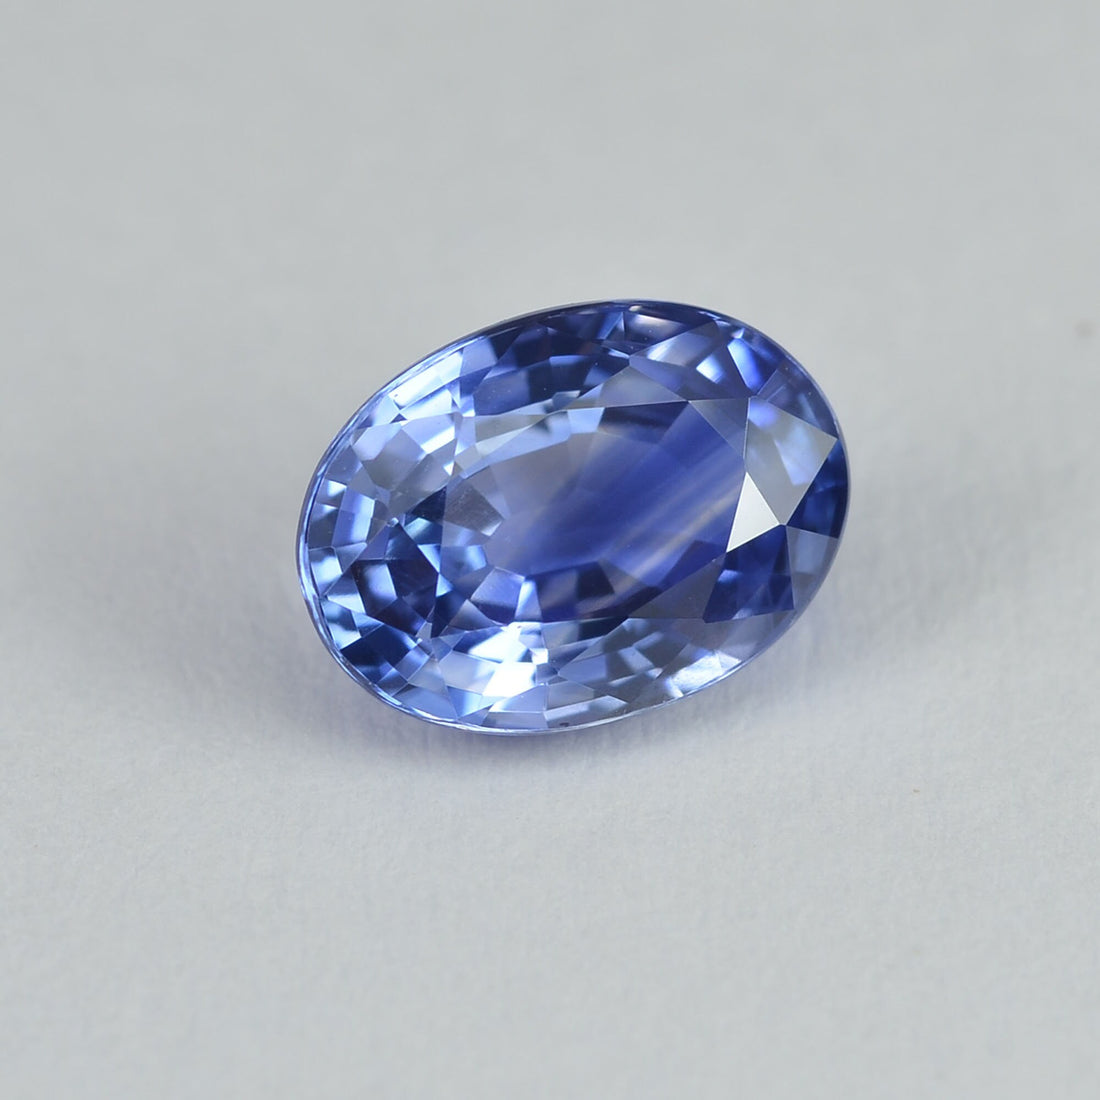 1.56 cts Natural Blue Sapphire Loose Gemstone Oval Cut